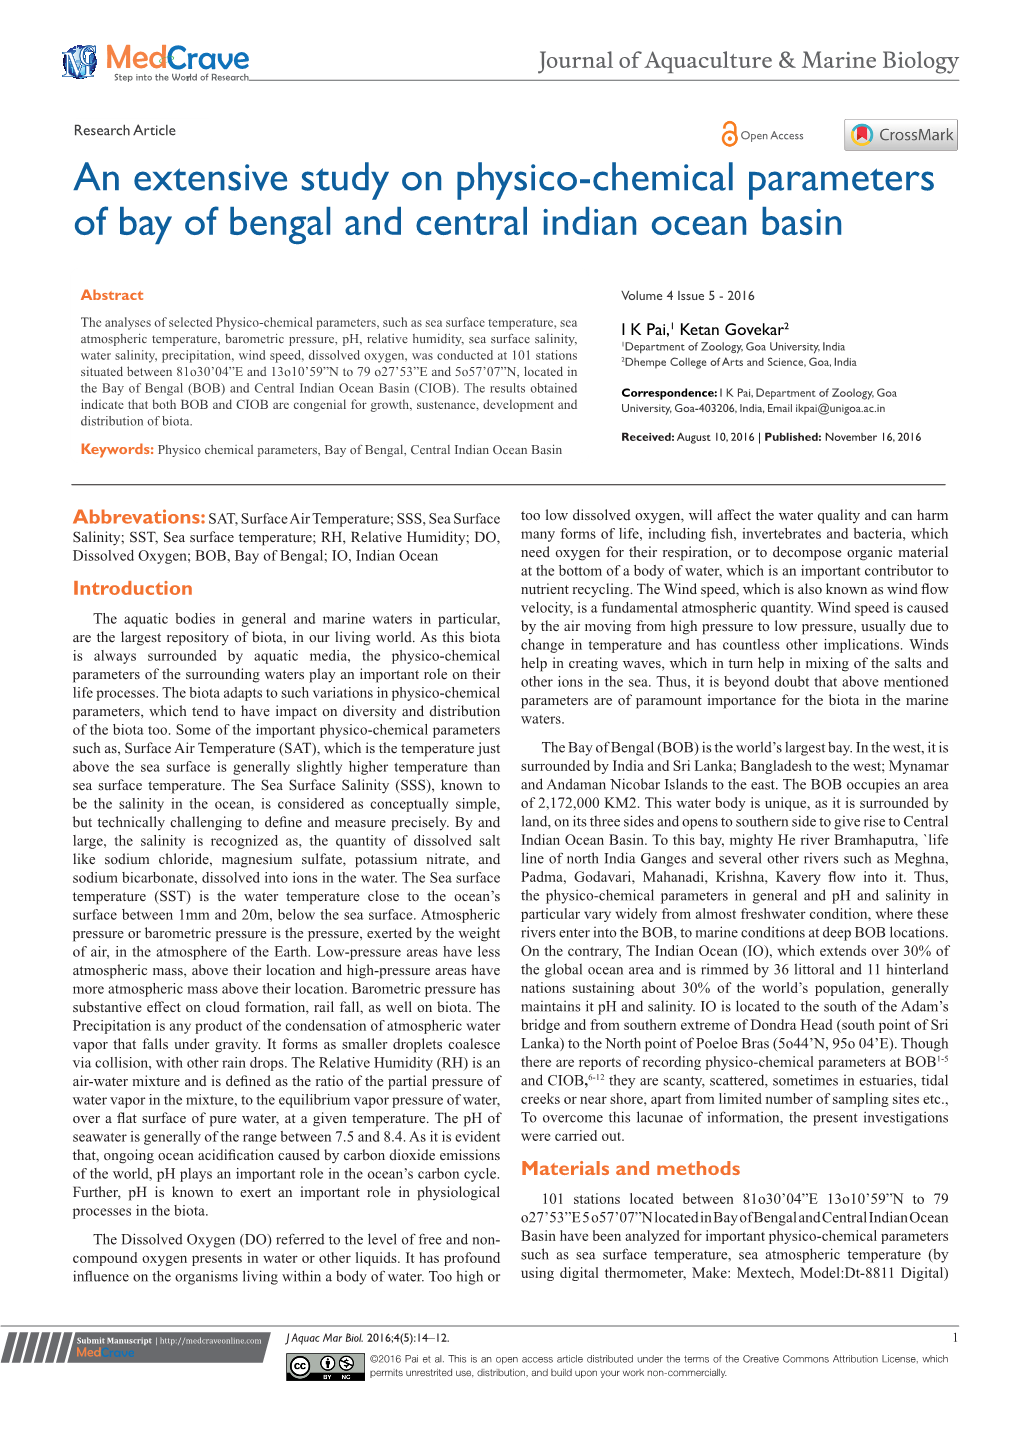 An Extensive Study on Physico-Chemical Parameters of Bay of Bengal and Central Indian Ocean Basin